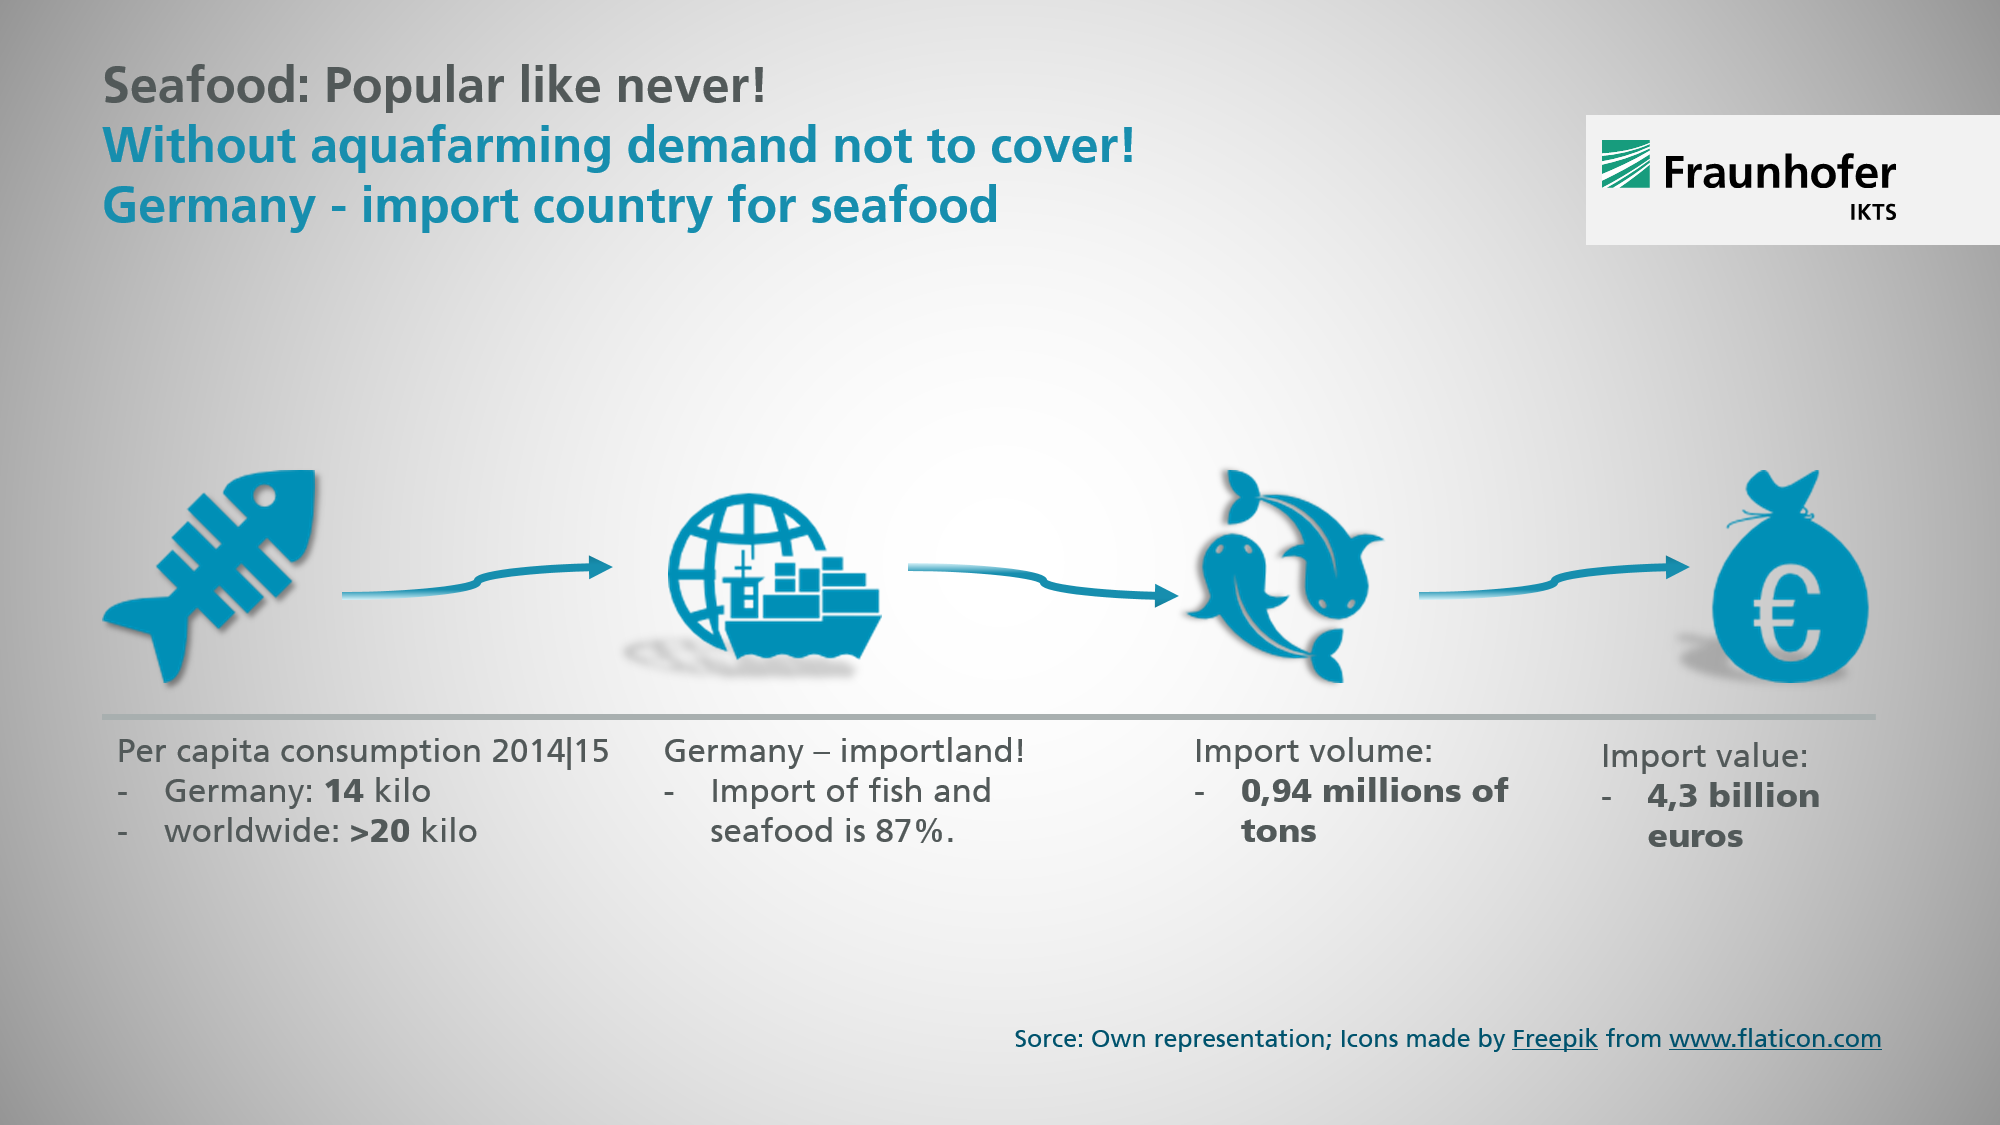 The popularity of seafood is increasing worldwide, creating a need for aquafarming. Germany is an importer of seafood!